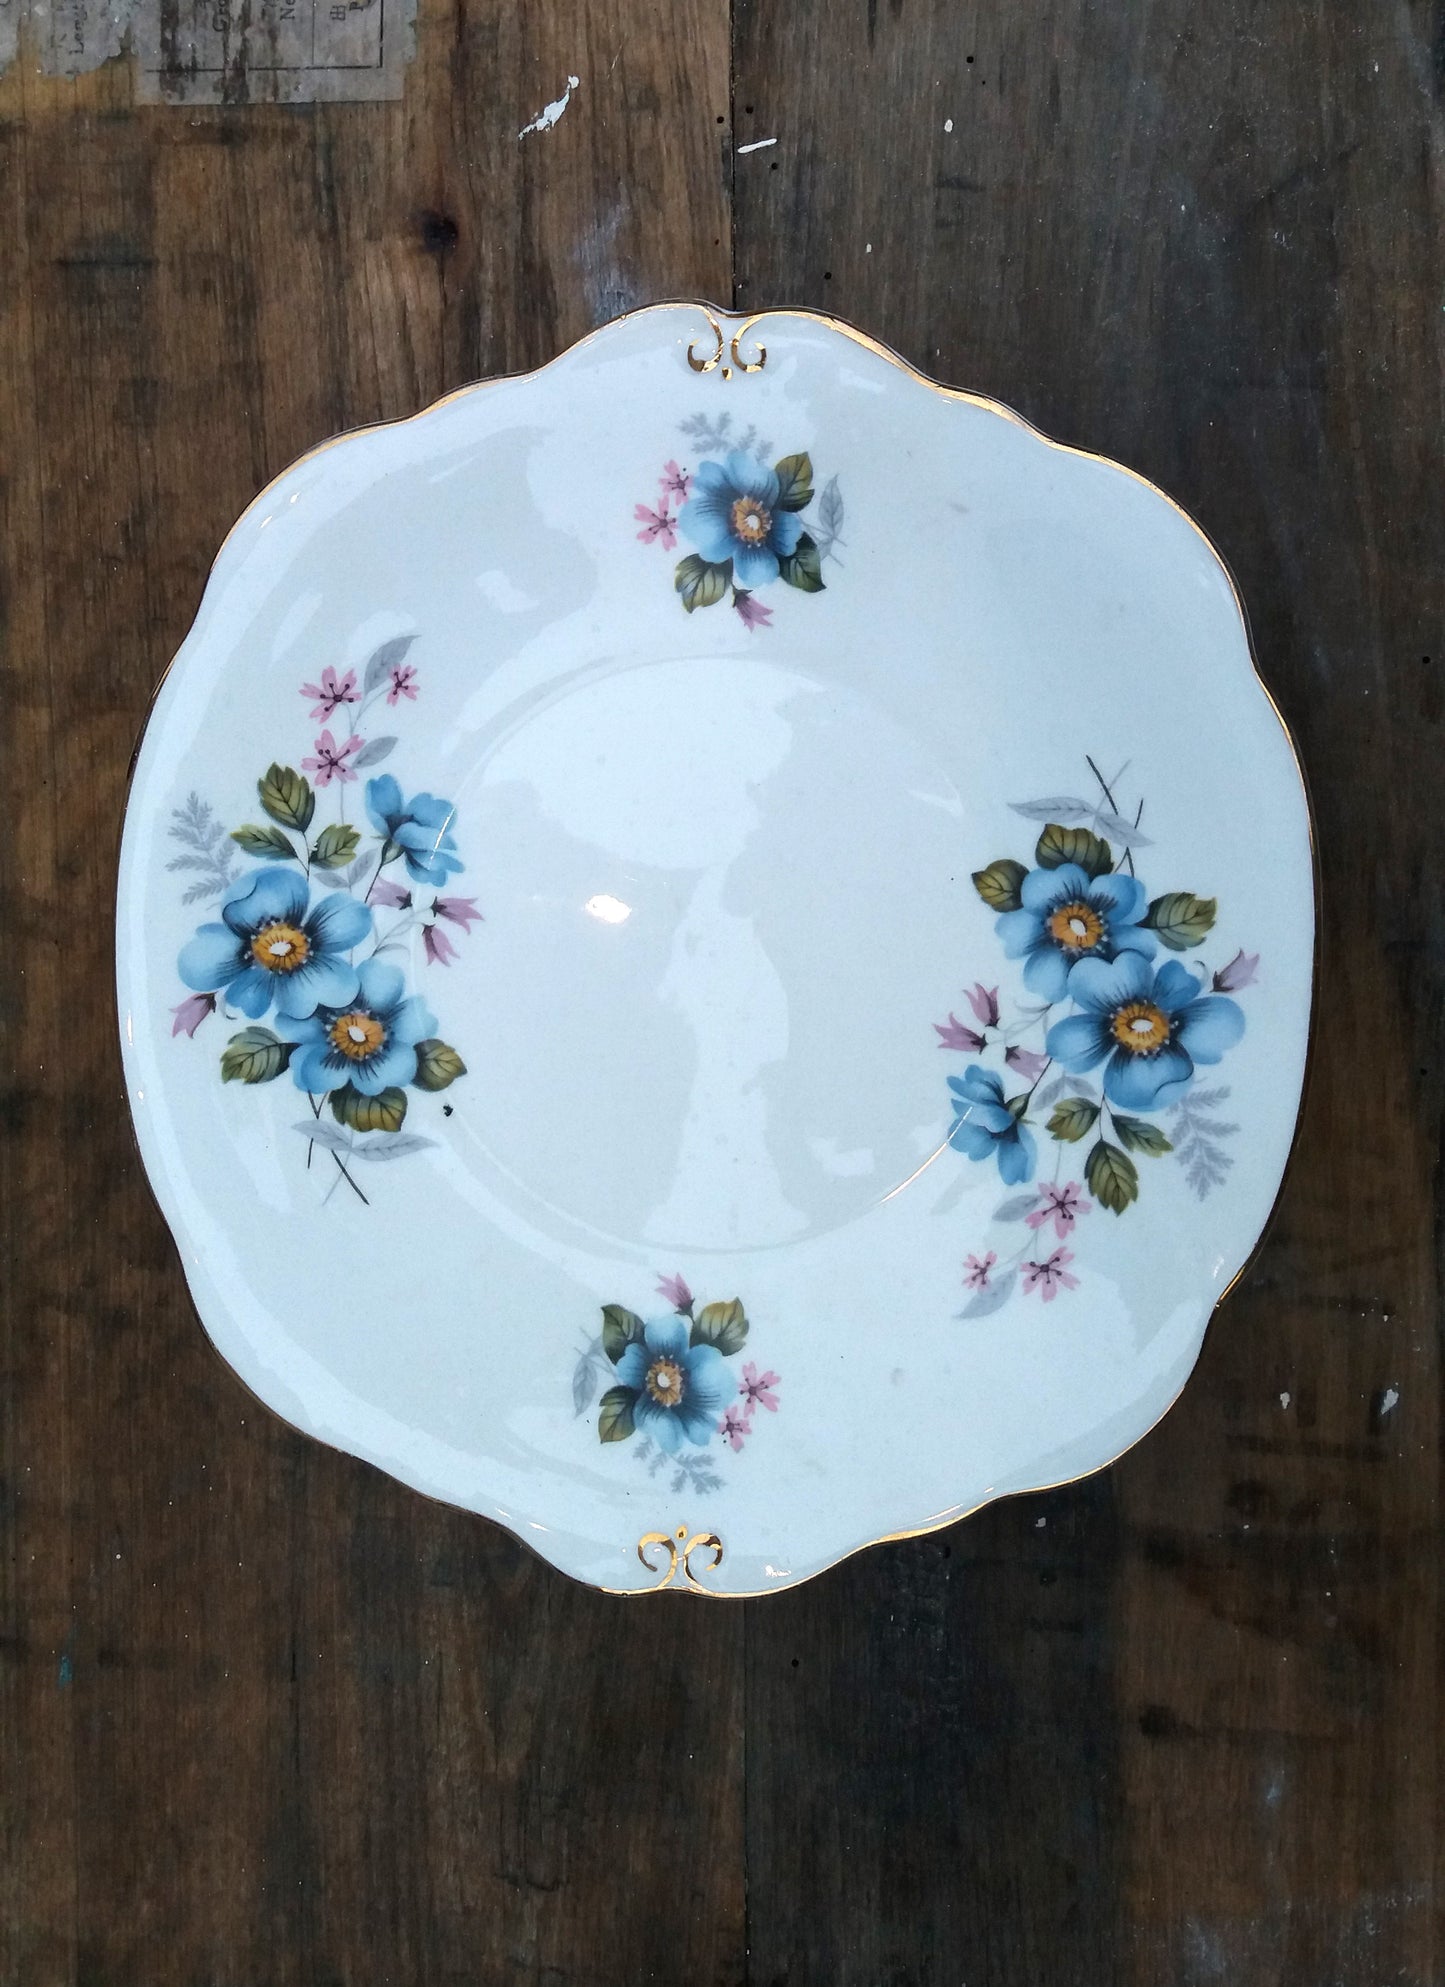 Shabby chic dinner plate with floral blue wild rose design in fine english bone china from Emily Rose Vintage